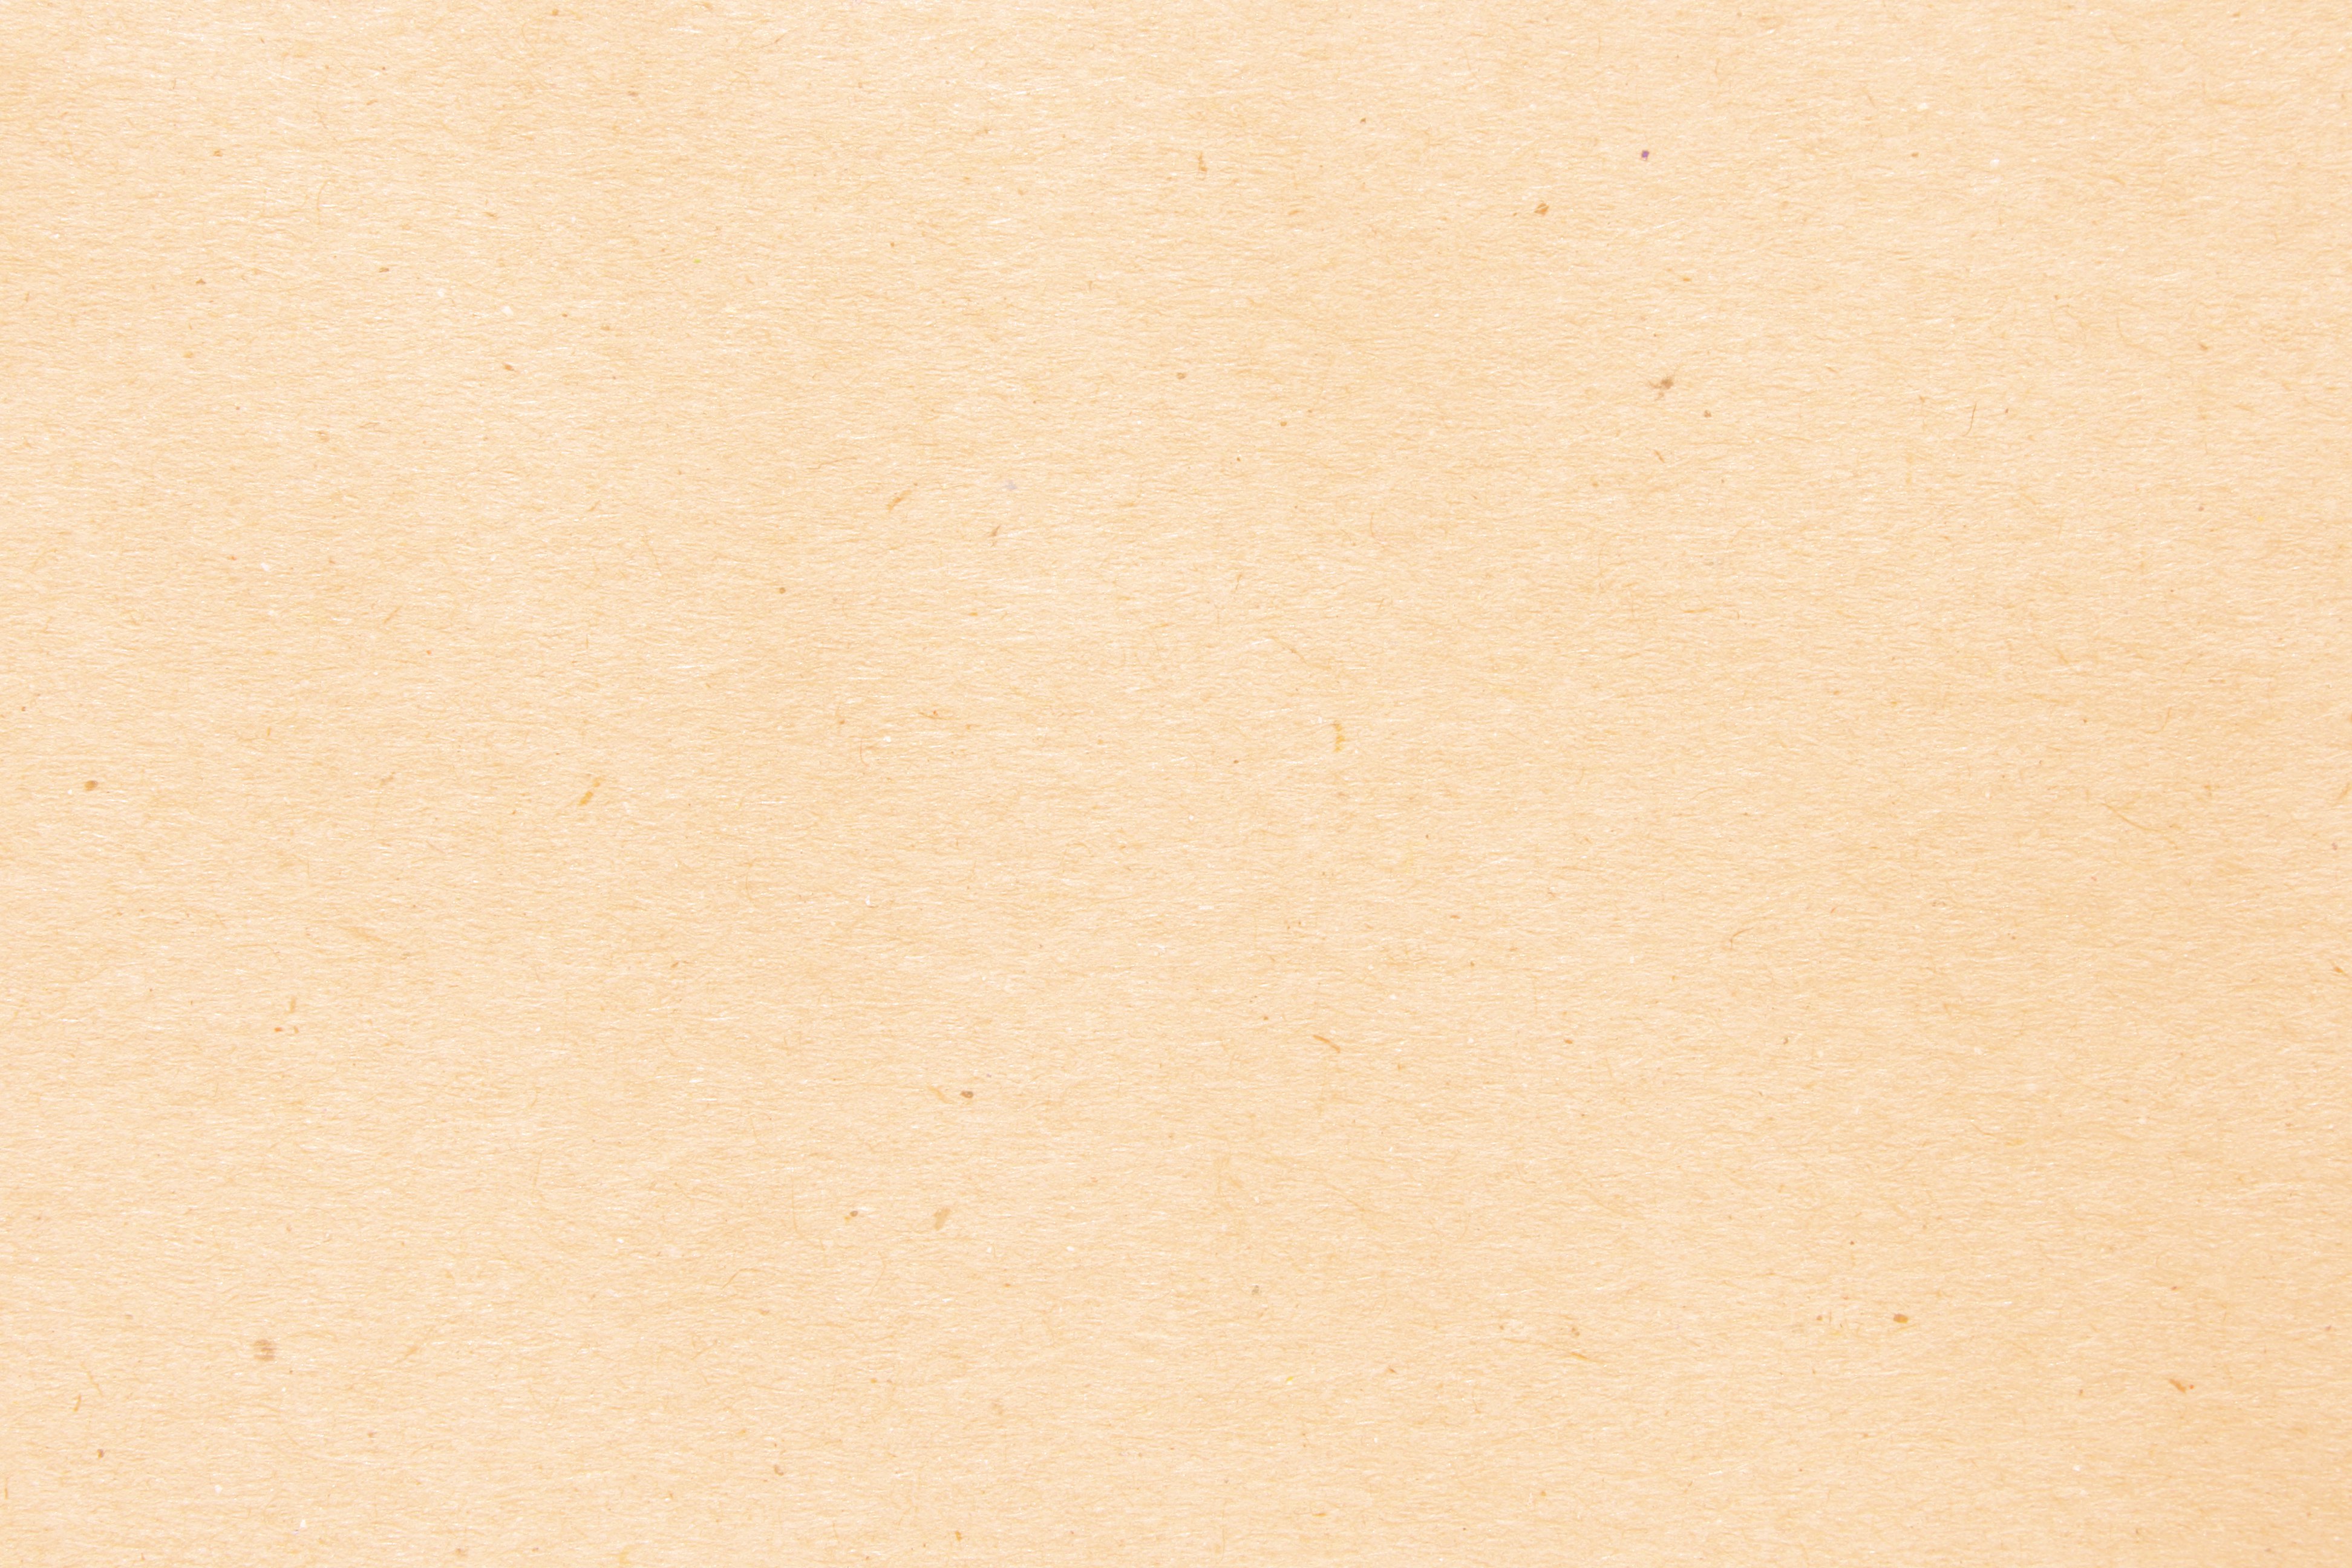 Peach Colored Paper Texture With Flecks Picture Free Coloring Wallpapers Download Free Images Wallpaper [coloring654.blogspot.com]